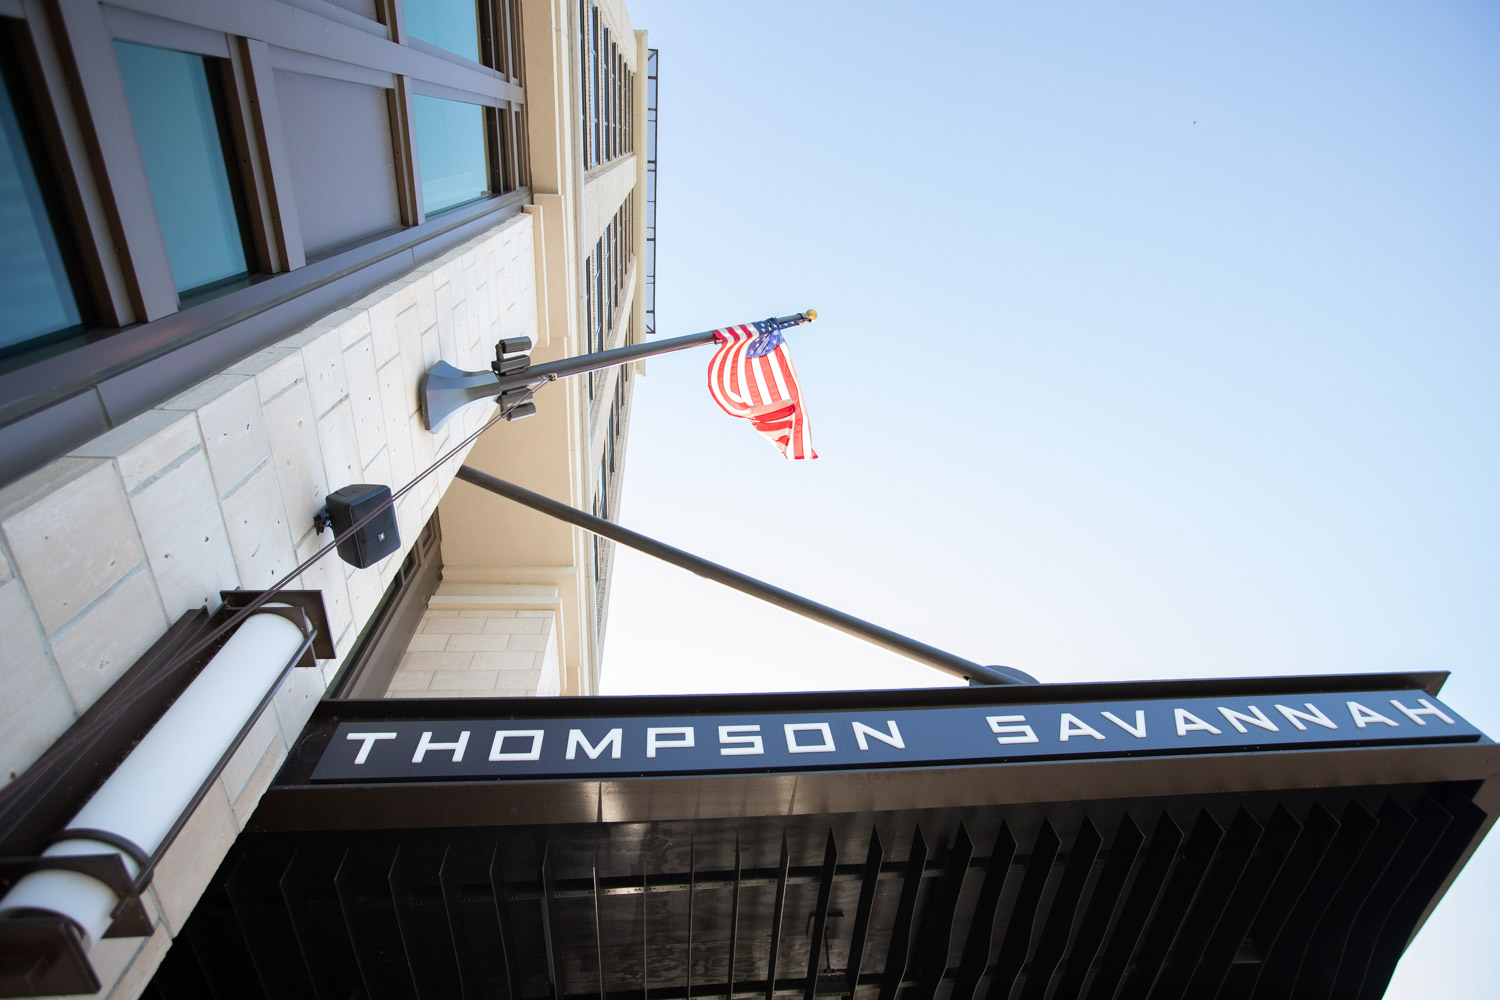 Where to Stay in Savannah: the Thompson Hotel